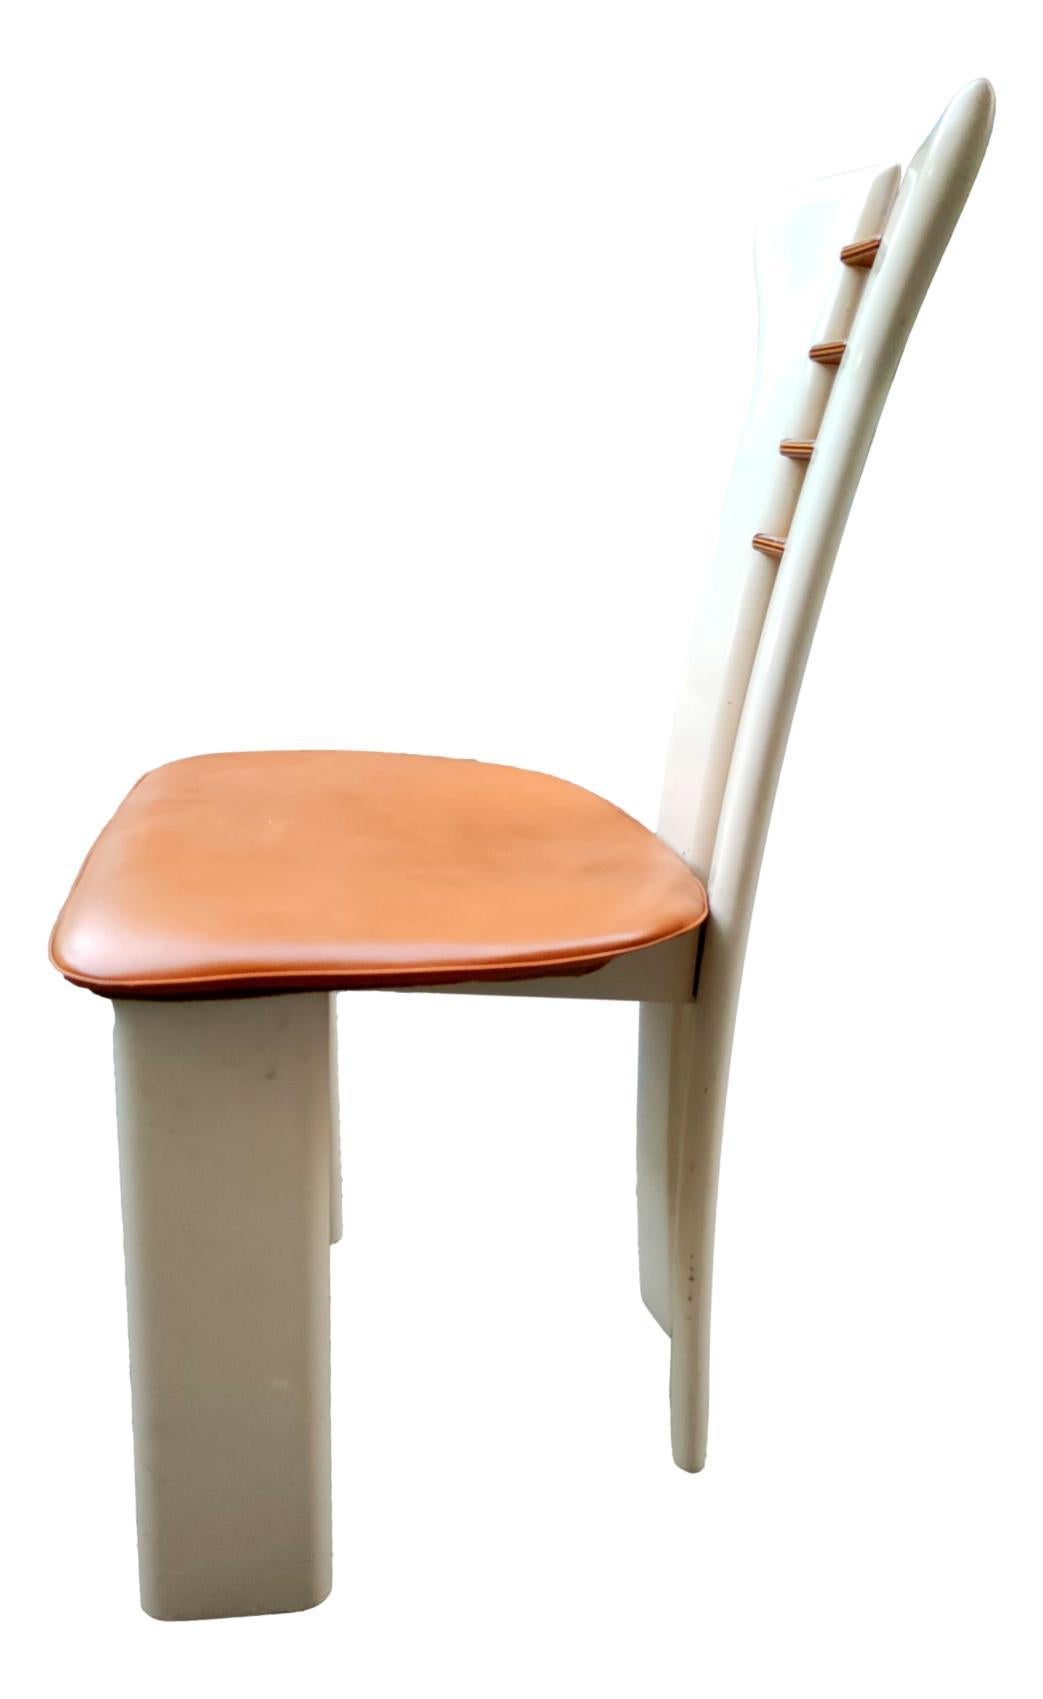 Four Pierre Cardin Design Chairs for Roche Bobois, 70's In Good Condition For Sale In taranto, IT